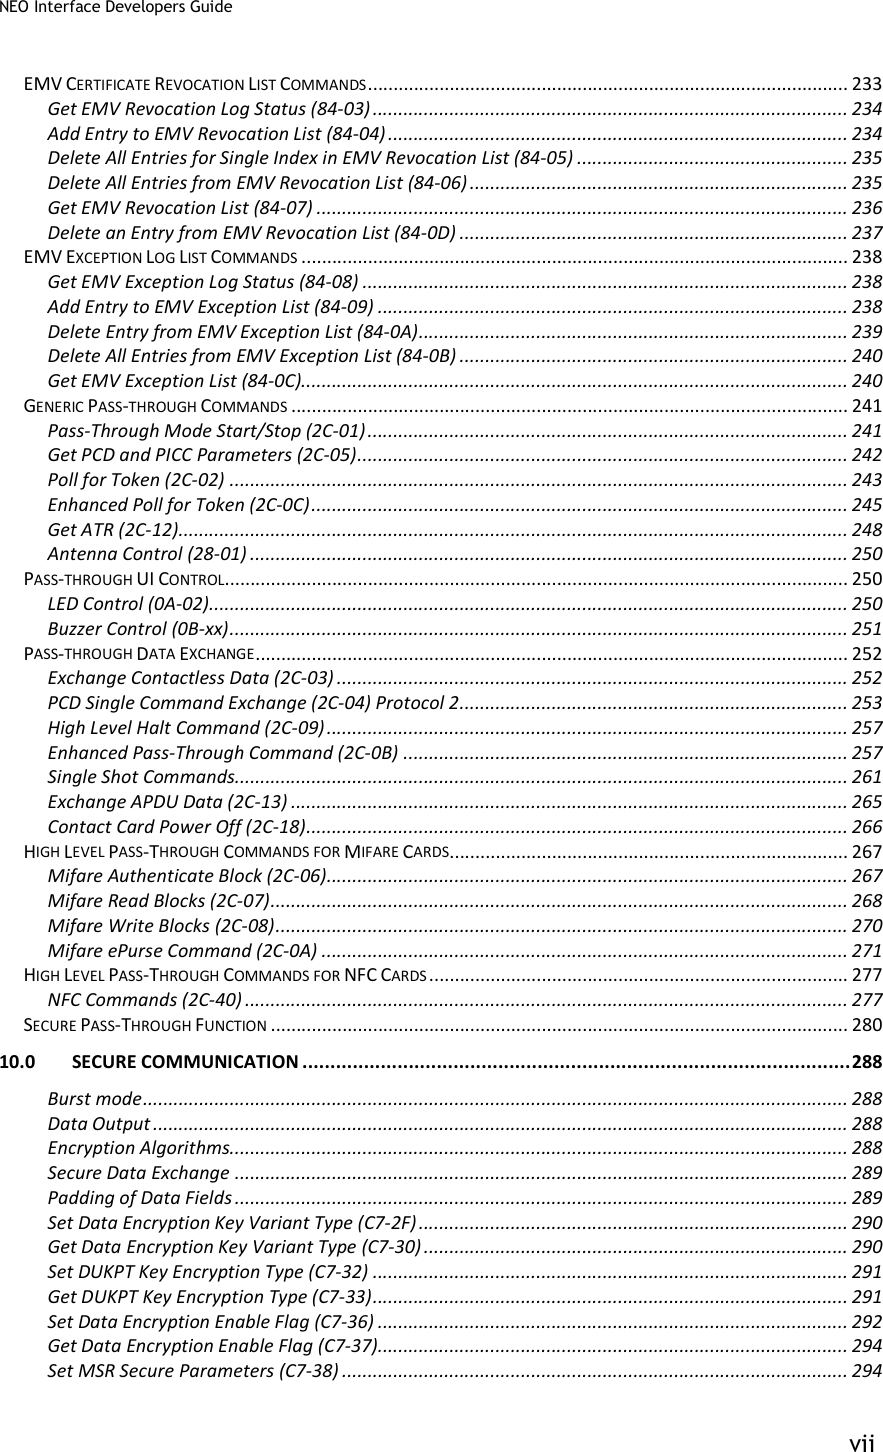 NEO Interface Developers Guide           vii EMV CERTIFICATE REVOCATION LIST COMMANDS .............................................................................................. 233 Get EMV Revocation Log Status (84-03) ............................................................................................. 234 Add Entry to EMV Revocation List (84-04) .......................................................................................... 234 Delete All Entries for Single Index in EMV Revocation List (84-05) ..................................................... 235 Delete All Entries from EMV Revocation List (84-06) .......................................................................... 235 Get EMV Revocation List (84-07) ........................................................................................................ 236 Delete an Entry from EMV Revocation List (84-0D) ............................................................................ 237 EMV EXCEPTION LOG LIST COMMANDS ........................................................................................................... 238 Get EMV Exception Log Status (84-08) ............................................................................................... 238 Add Entry to EMV Exception List (84-09) ............................................................................................ 238 Delete Entry from EMV Exception List (84-0A) .................................................................................... 239 Delete All Entries from EMV Exception List (84-0B) ............................................................................ 240 Get EMV Exception List (84-0C)........................................................................................................... 240 GENERIC PASS-THROUGH COMMANDS ............................................................................................................. 241 Pass-Through Mode Start/Stop (2C-01) .............................................................................................. 241 Get PCD and PICC Parameters (2C-05) ................................................................................................ 242 Poll for Token (2C-02) ......................................................................................................................... 243 Enhanced Poll for Token (2C-0C) ......................................................................................................... 245 Get ATR (2C-12)................................................................................................................................... 248 Antenna Control (28-01) ..................................................................................................................... 250 PASS-THROUGH UI CONTROL .......................................................................................................................... 250 LED Control (0A-02) ............................................................................................................................. 250 Buzzer Control (0B-xx) ......................................................................................................................... 251 PASS-THROUGH DATA EXCHANGE .................................................................................................................... 252 Exchange Contactless Data (2C-03) .................................................................................................... 252 PCD Single Command Exchange (2C-04) Protocol 2 ............................................................................ 253 High Level Halt Command (2C-09) ...................................................................................................... 257 Enhanced Pass-Through Command (2C-0B) ....................................................................................... 257 Single Shot Commands........................................................................................................................ 261 Exchange APDU Data (2C-13) ............................................................................................................. 265 Contact Card Power Off (2C-18) .......................................................................................................... 266 HIGH LEVEL PASS-THROUGH COMMANDS FOR MIFARE CARDS .............................................................................. 267 Mifare Authenticate Block (2C-06) ...................................................................................................... 267 Mifare Read Blocks (2C-07) ................................................................................................................. 268 Mifare Write Blocks (2C-08) ................................................................................................................ 270 Mifare ePurse Command (2C-0A) ....................................................................................................... 271 HIGH LEVEL PASS-THROUGH COMMANDS FOR NFC CARDS .................................................................................. 277 NFC Commands (2C-40) ...................................................................................................................... 277 SECURE PASS-THROUGH FUNCTION ................................................................................................................. 280 10.0 SECURE COMMUNICATION .................................................................................................. 288 Burst mode .......................................................................................................................................... 288 Data Output ........................................................................................................................................ 288 Encryption Algorithms......................................................................................................................... 288 Secure Data Exchange ........................................................................................................................ 289 Padding of Data Fields ........................................................................................................................ 289 Set Data Encryption Key Variant Type (C7-2F) .................................................................................... 290 Get Data Encryption Key Variant Type (C7-30) ................................................................................... 290 Set DUKPT Key Encryption Type (C7-32) ............................................................................................. 291 Get DUKPT Key Encryption Type (C7-33) ............................................................................................. 291 Set Data Encryption Enable Flag (C7-36) ............................................................................................ 292 Get Data Encryption Enable Flag (C7-37)............................................................................................ 294 Set MSR Secure Parameters (C7-38) ................................................................................................... 294 